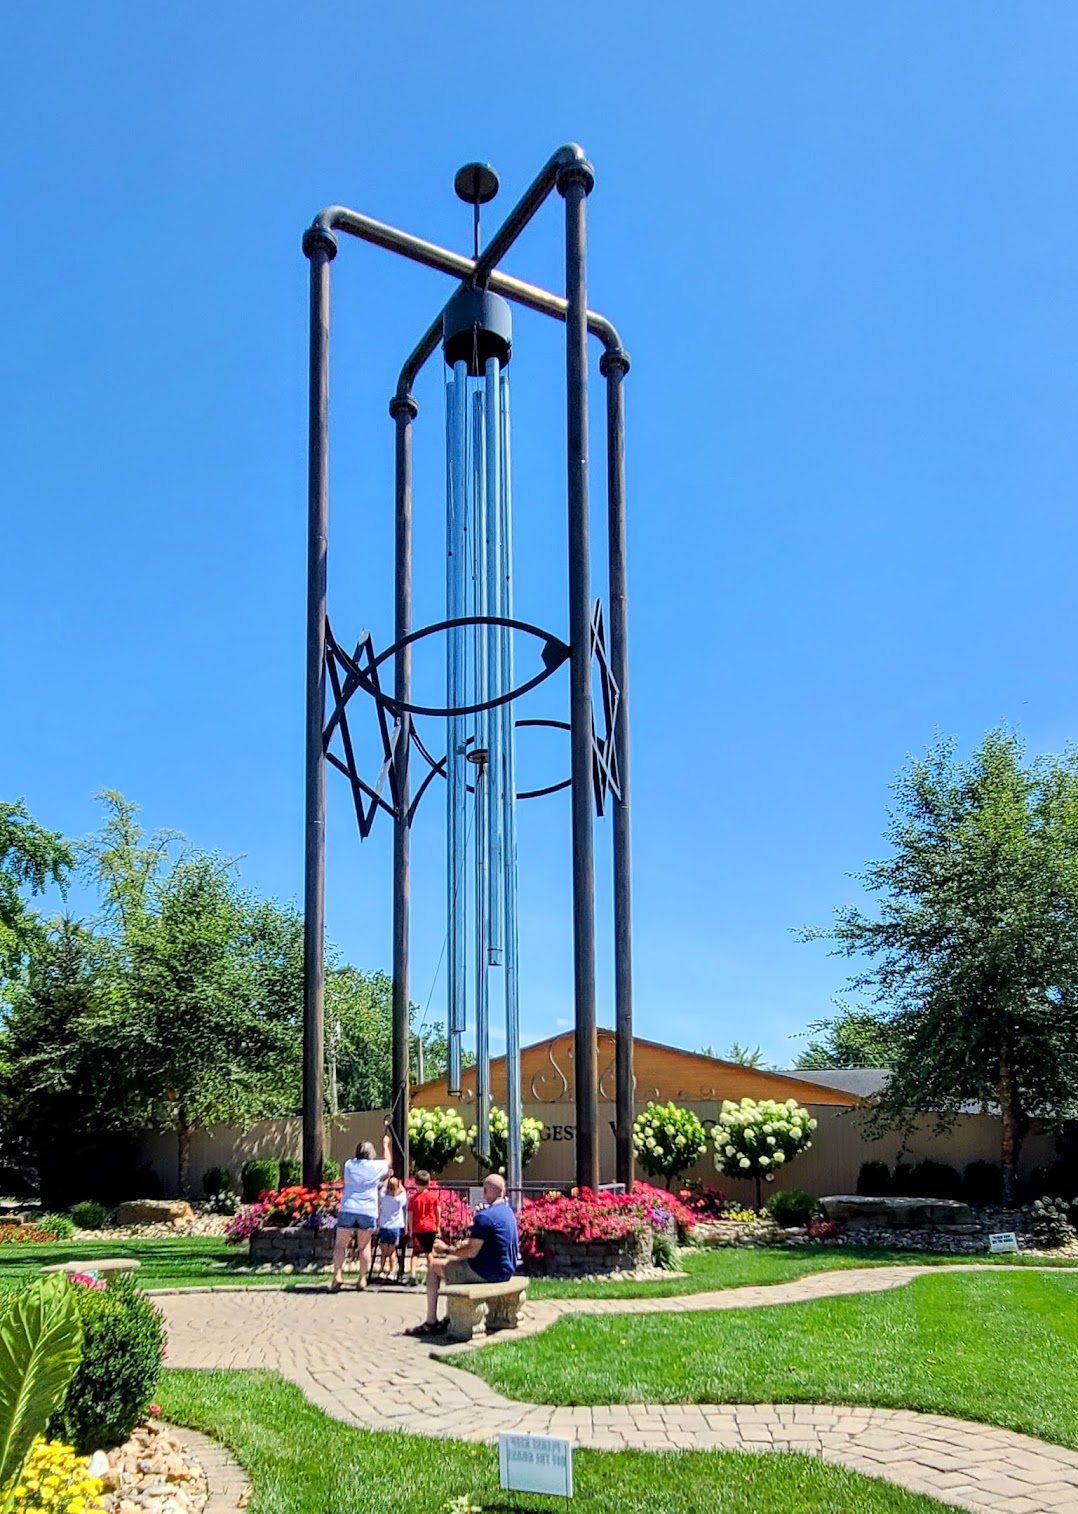 The World's Largest Wind Chime